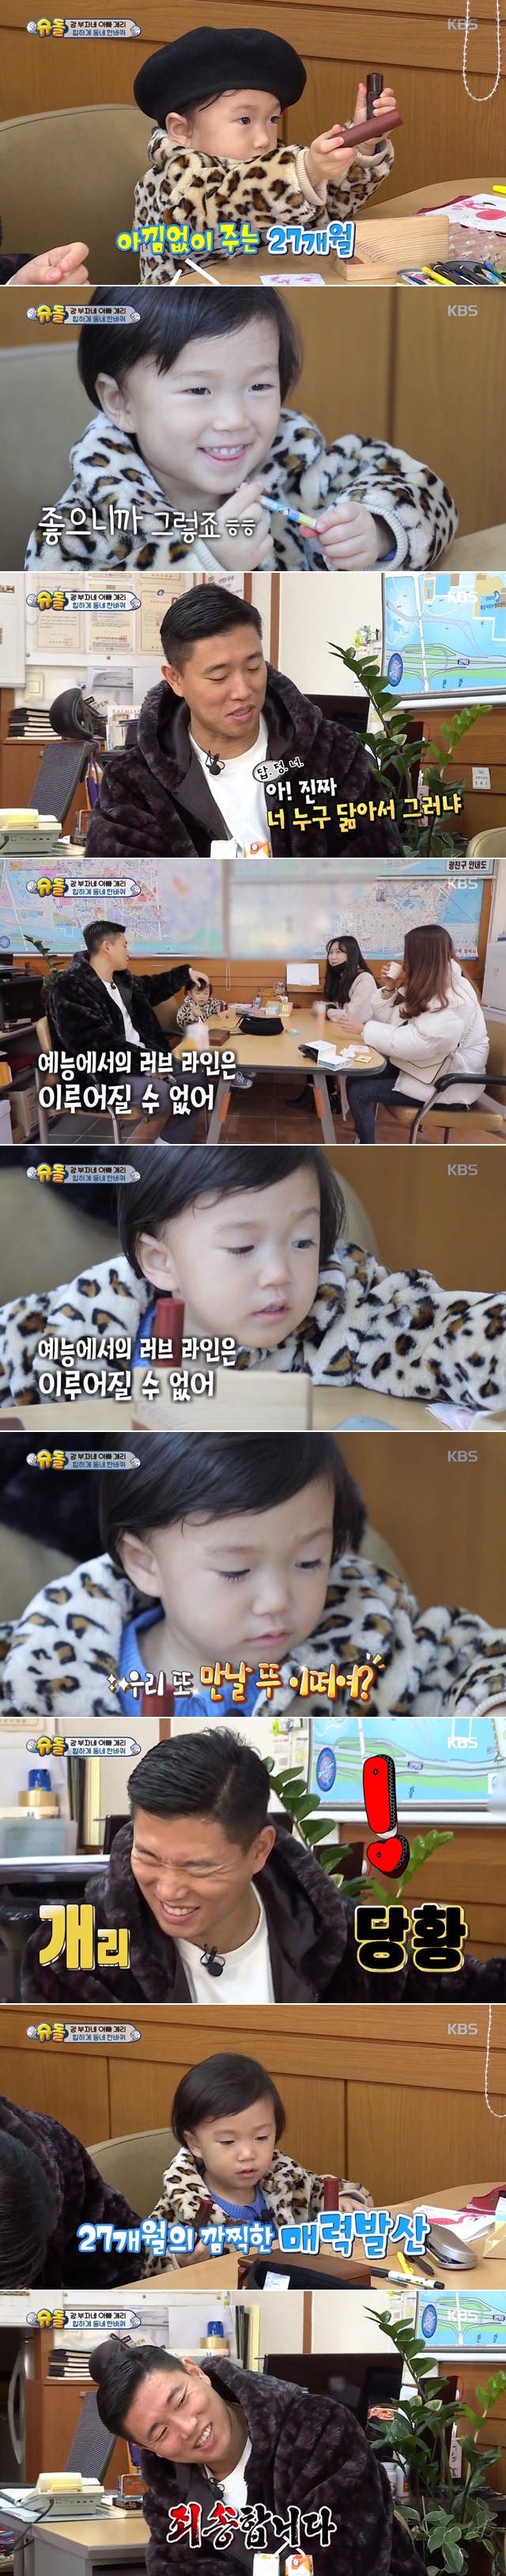 The entertainment love line cannot be done, Gary said.On March 8, KBS 2TV Superman Returns featured Gary visiting real estate with Son Hao.Gary and Hao met two women who came to see the house at the real estate on the day. Hao expressed his favor by picking up these and those things to his sisters.Then Gary said, Im playing.Who is it like? The love line at entertainment can not be done. He made a statement that seemed to target Running Man.In the past, Gary was active as a monthly couple with Song Ji-hyo at the time of SBS Running Man appearance.pear hyo-ju